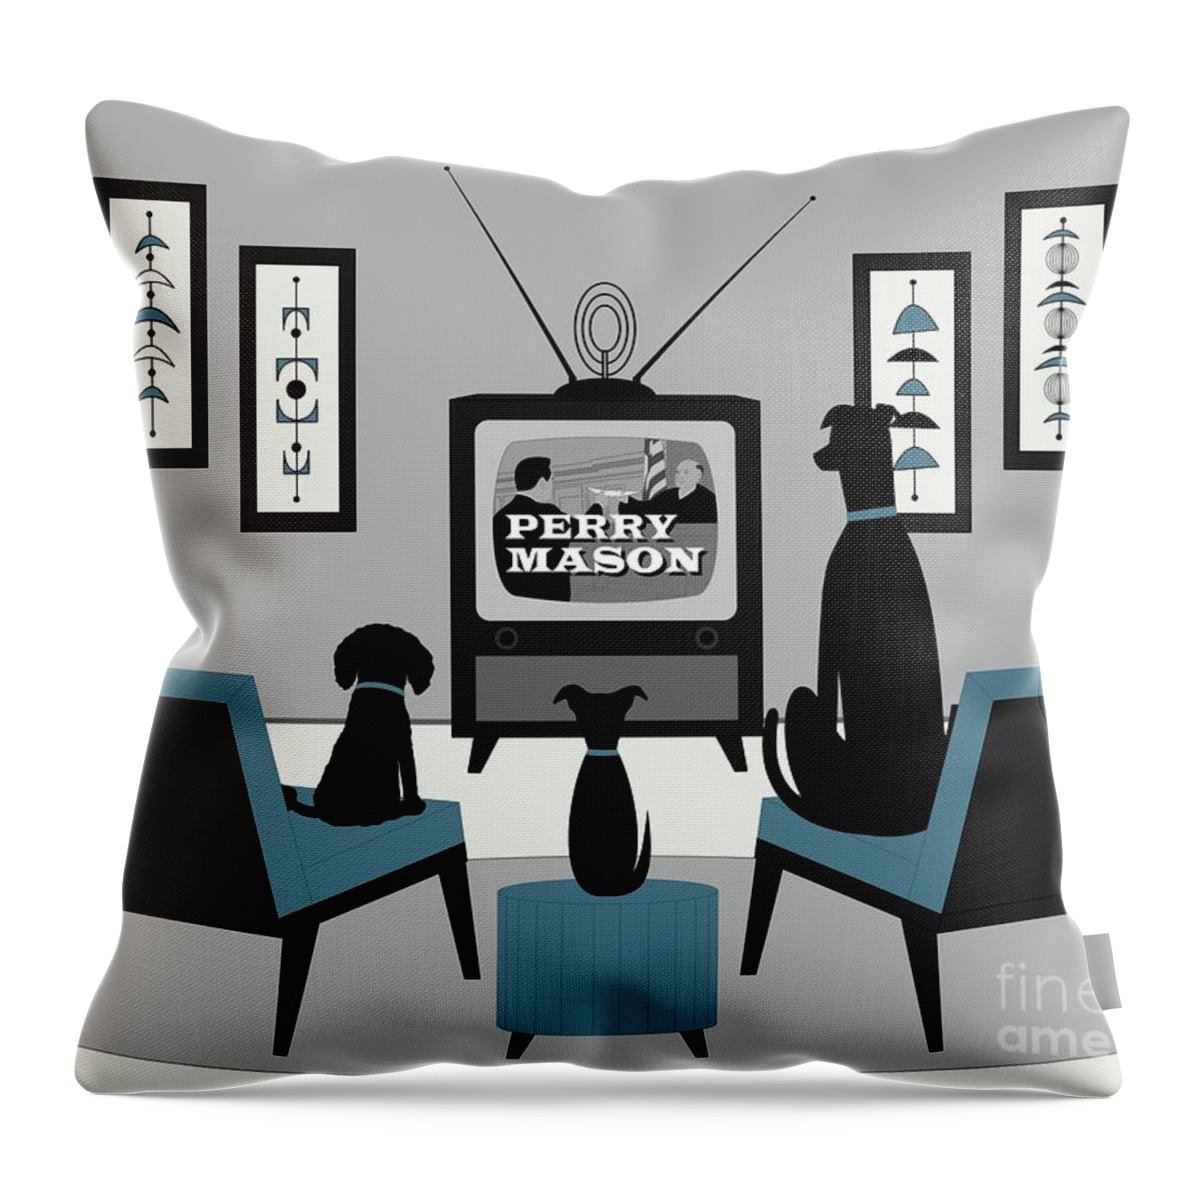 Black Dogs Throw Pillow featuring the digital art Mid Century Dogs Watch Perry Mason by Donna Mibus